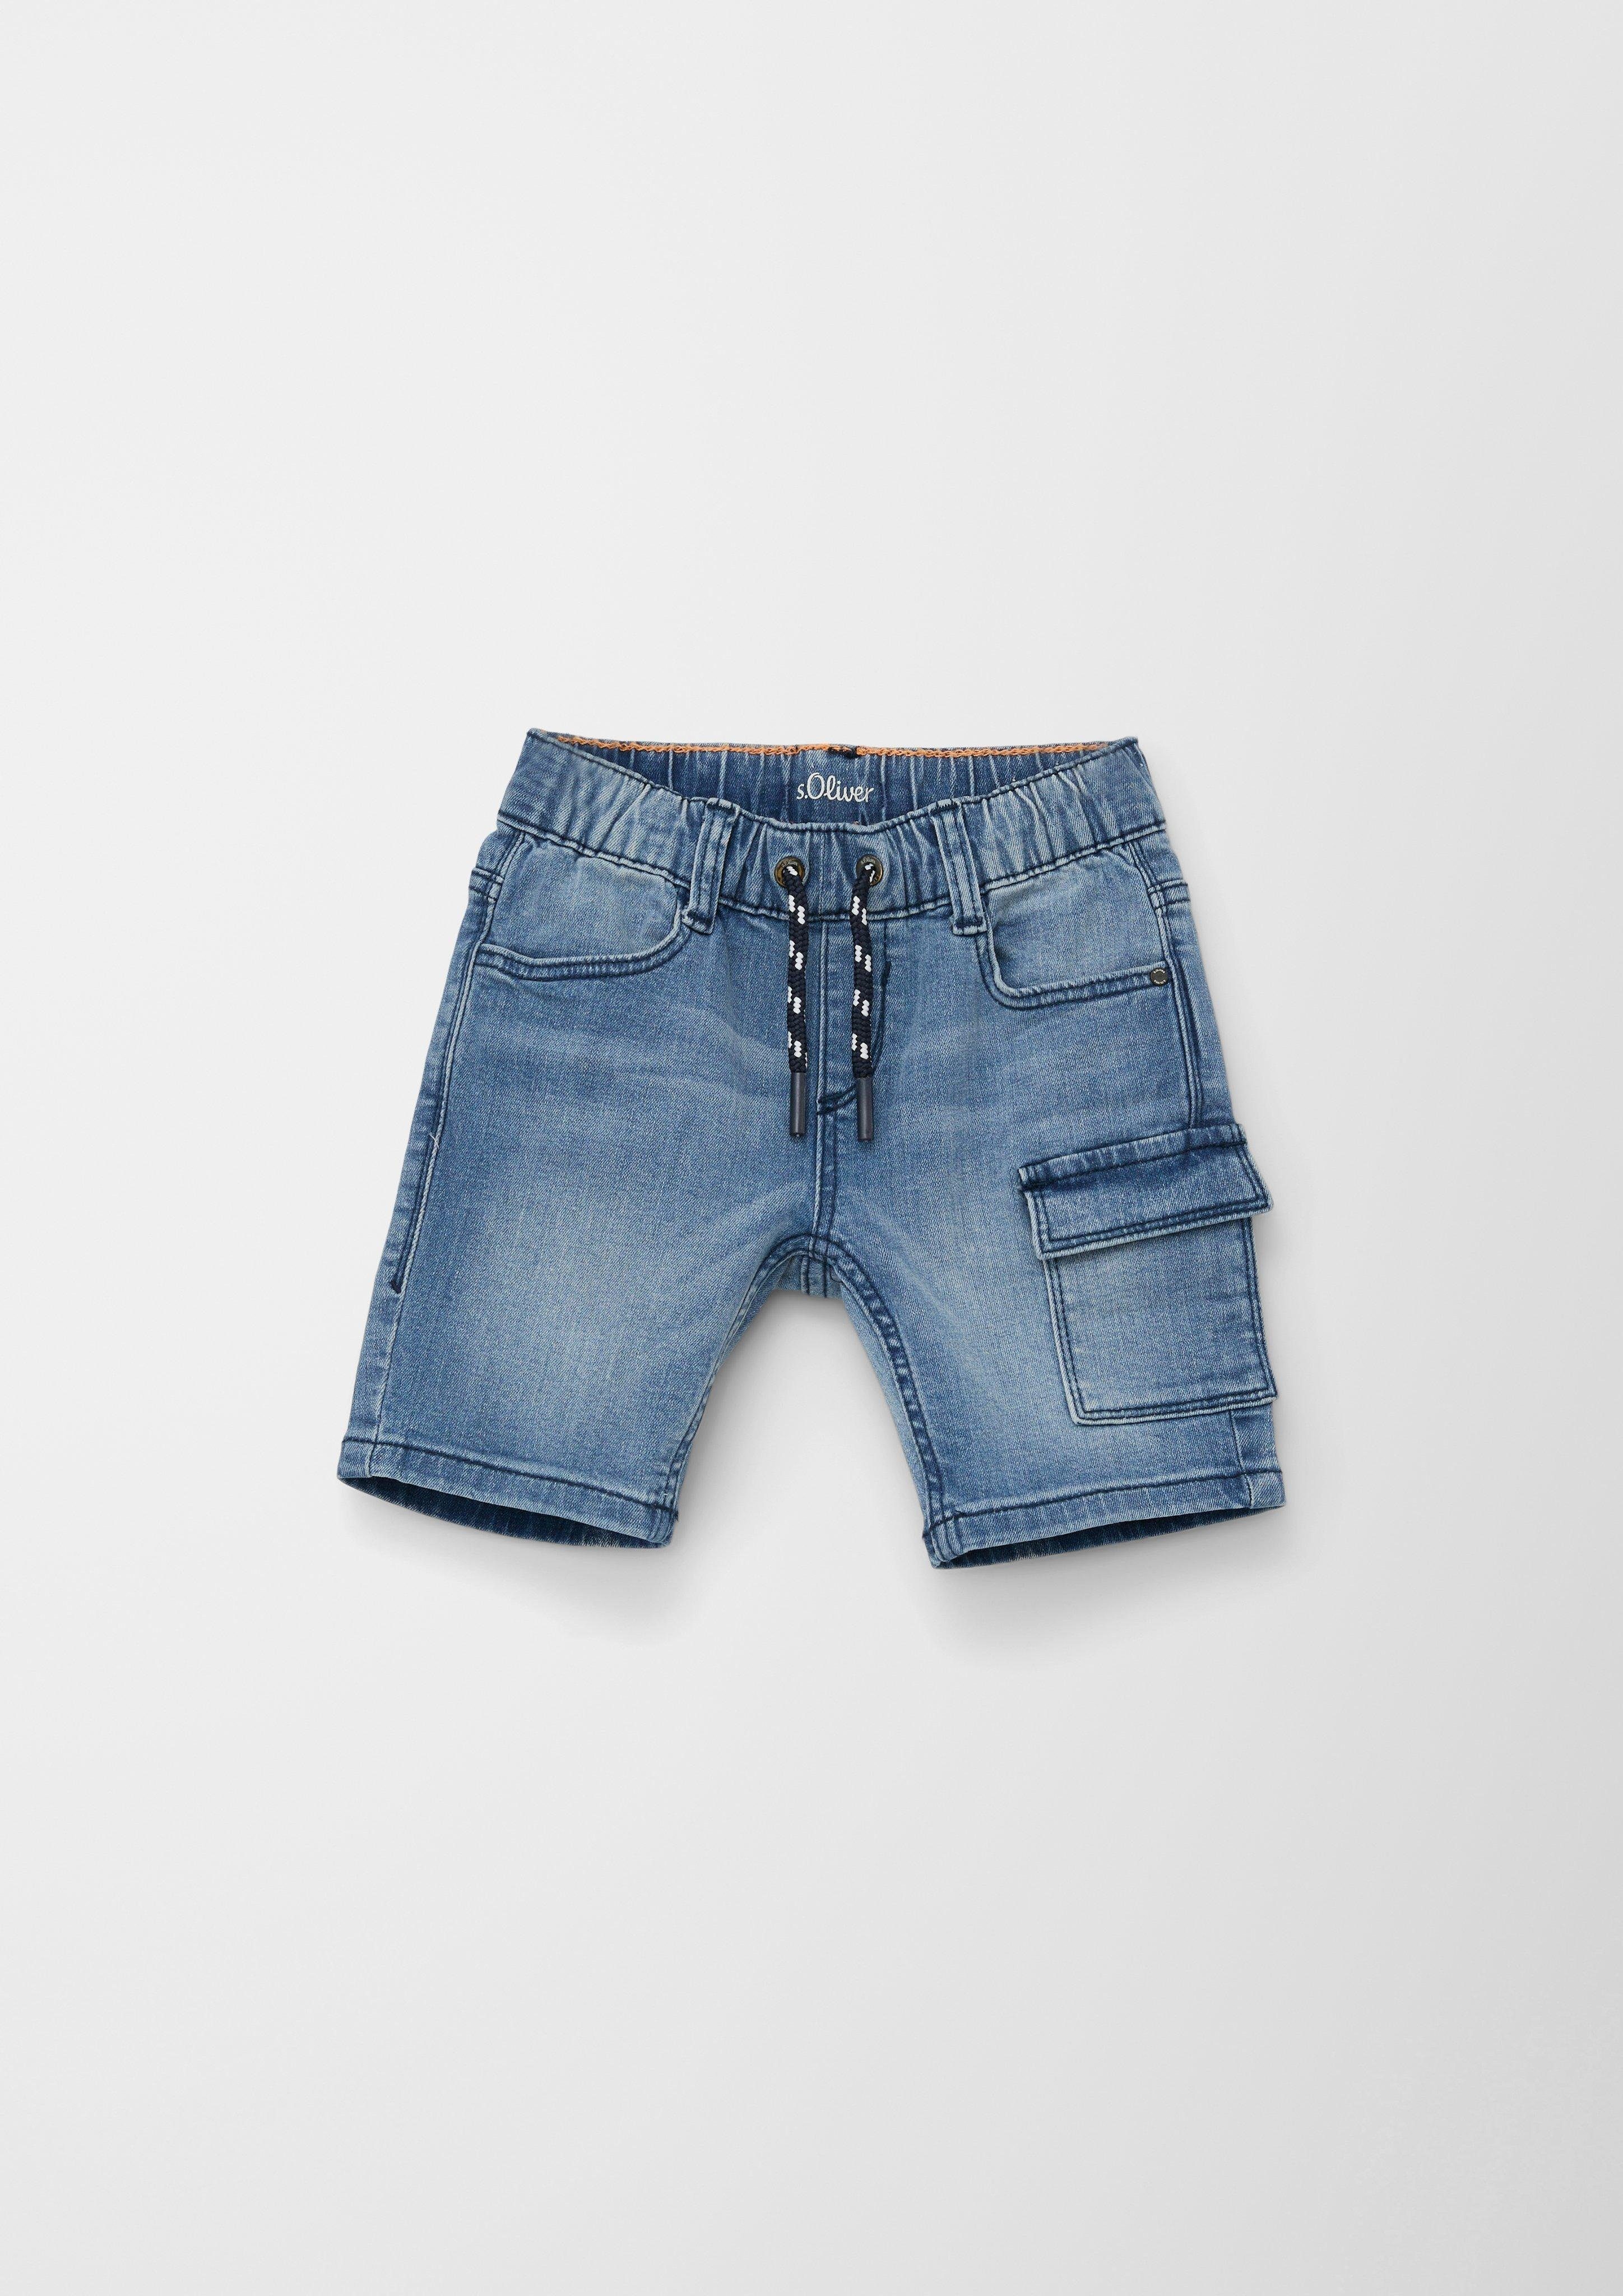 s.Oliver Jeansshorts Jeans-Bermuda Brad Mid Leg Fit Slim Tunnelzug, Rise Waschung Slim / / angedeuteter / Joggstyle